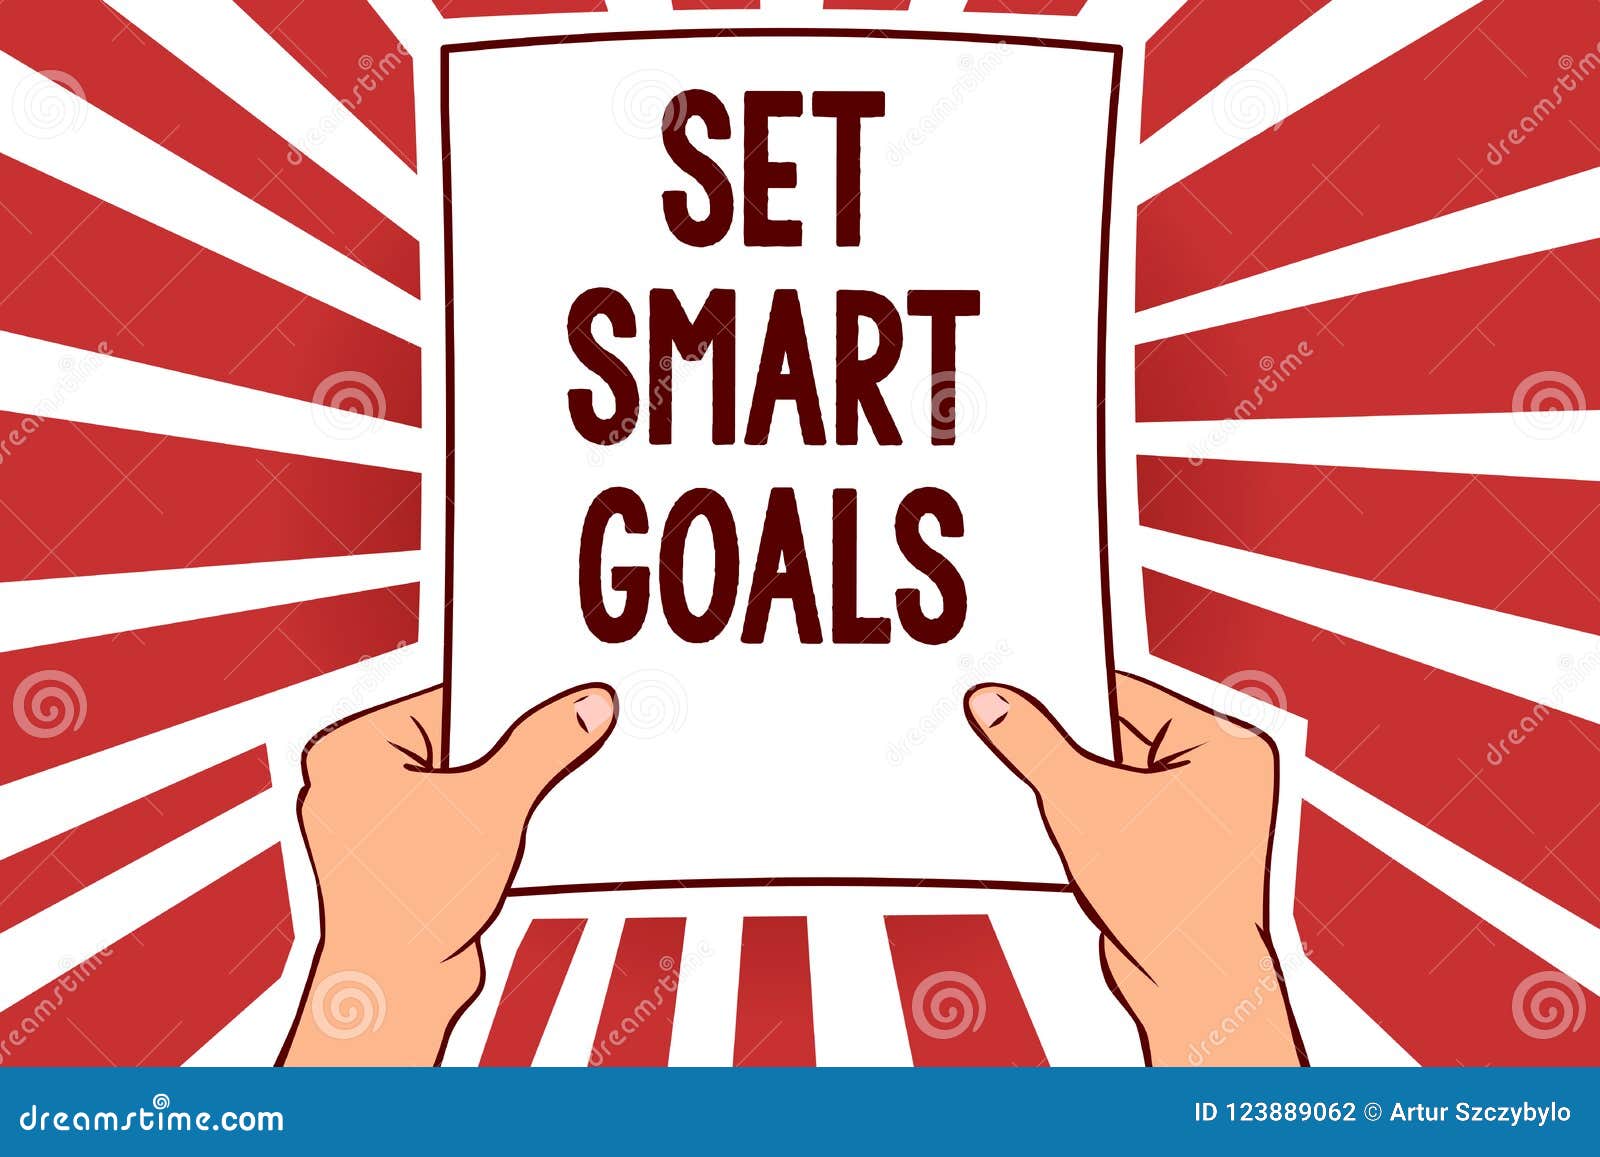 Handwriting Text Writing Set Smart Goals Concept Meaning Establish Achievable Objectives Make Good Business Plans Man Holding Pap Stock Illustration Illustration Of Inspiration Goals